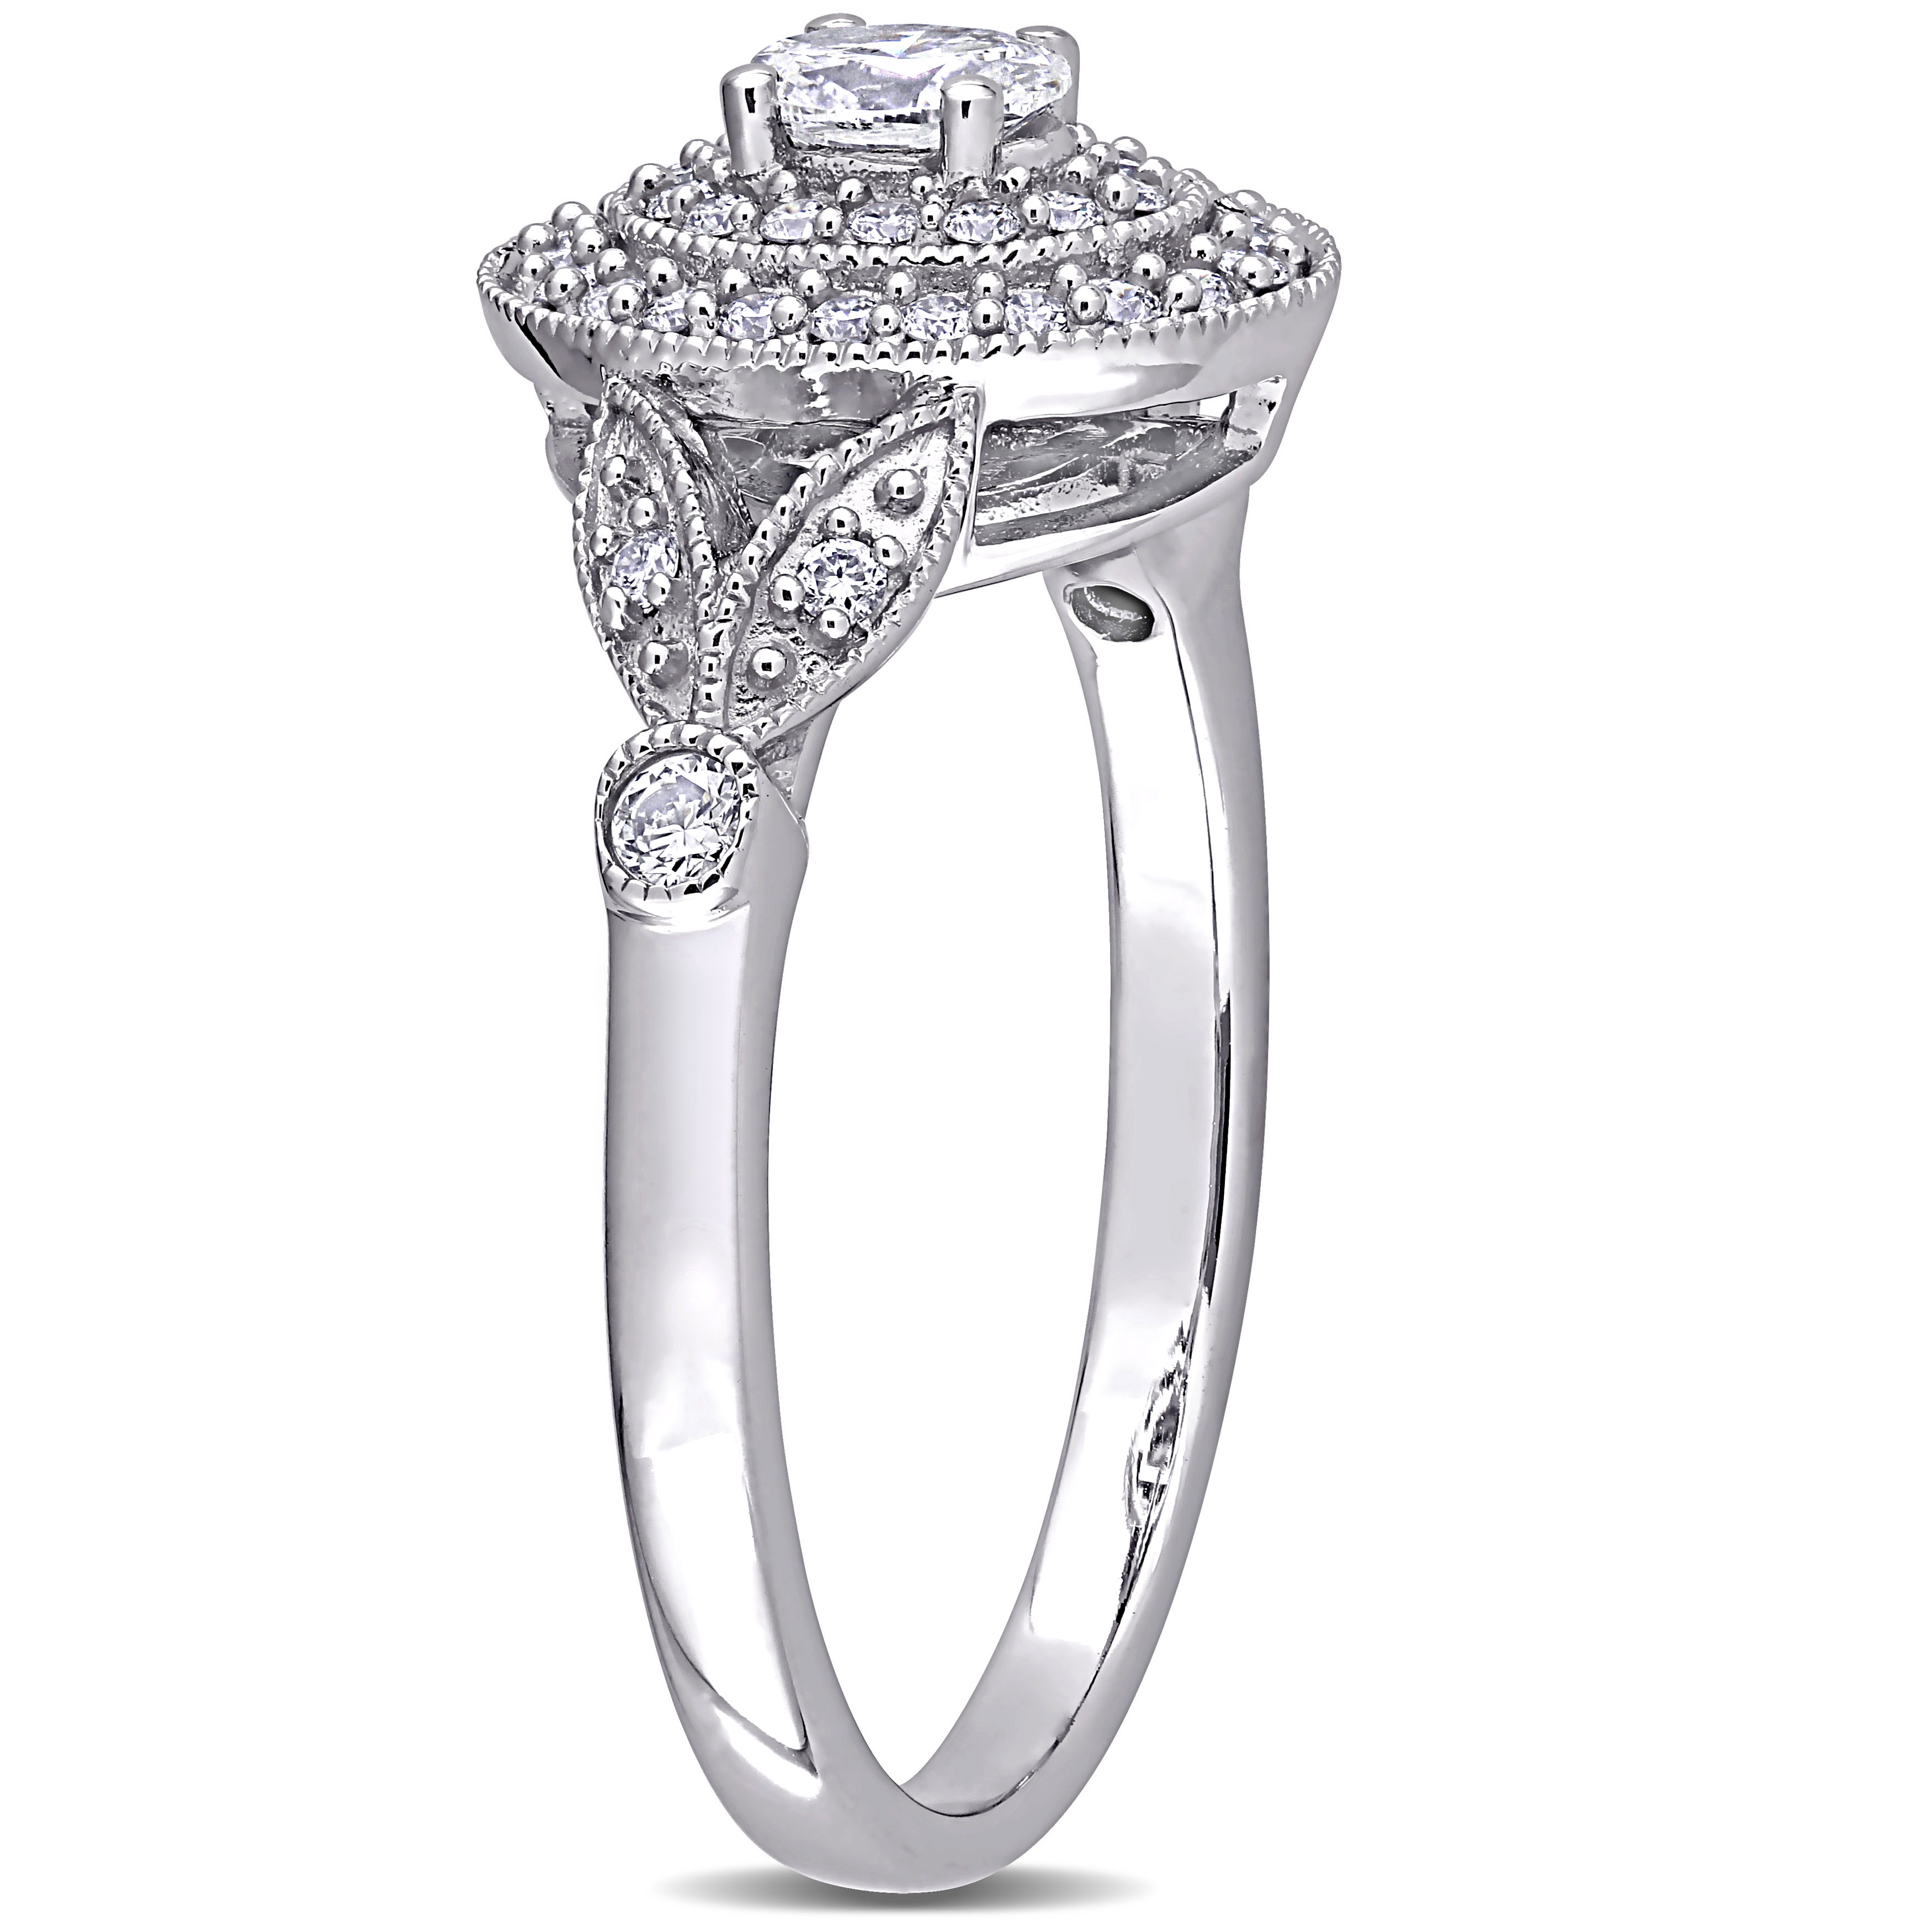 1/2 CT TW Oval and Round Diamond Double Halo Ring in 14k White Gold